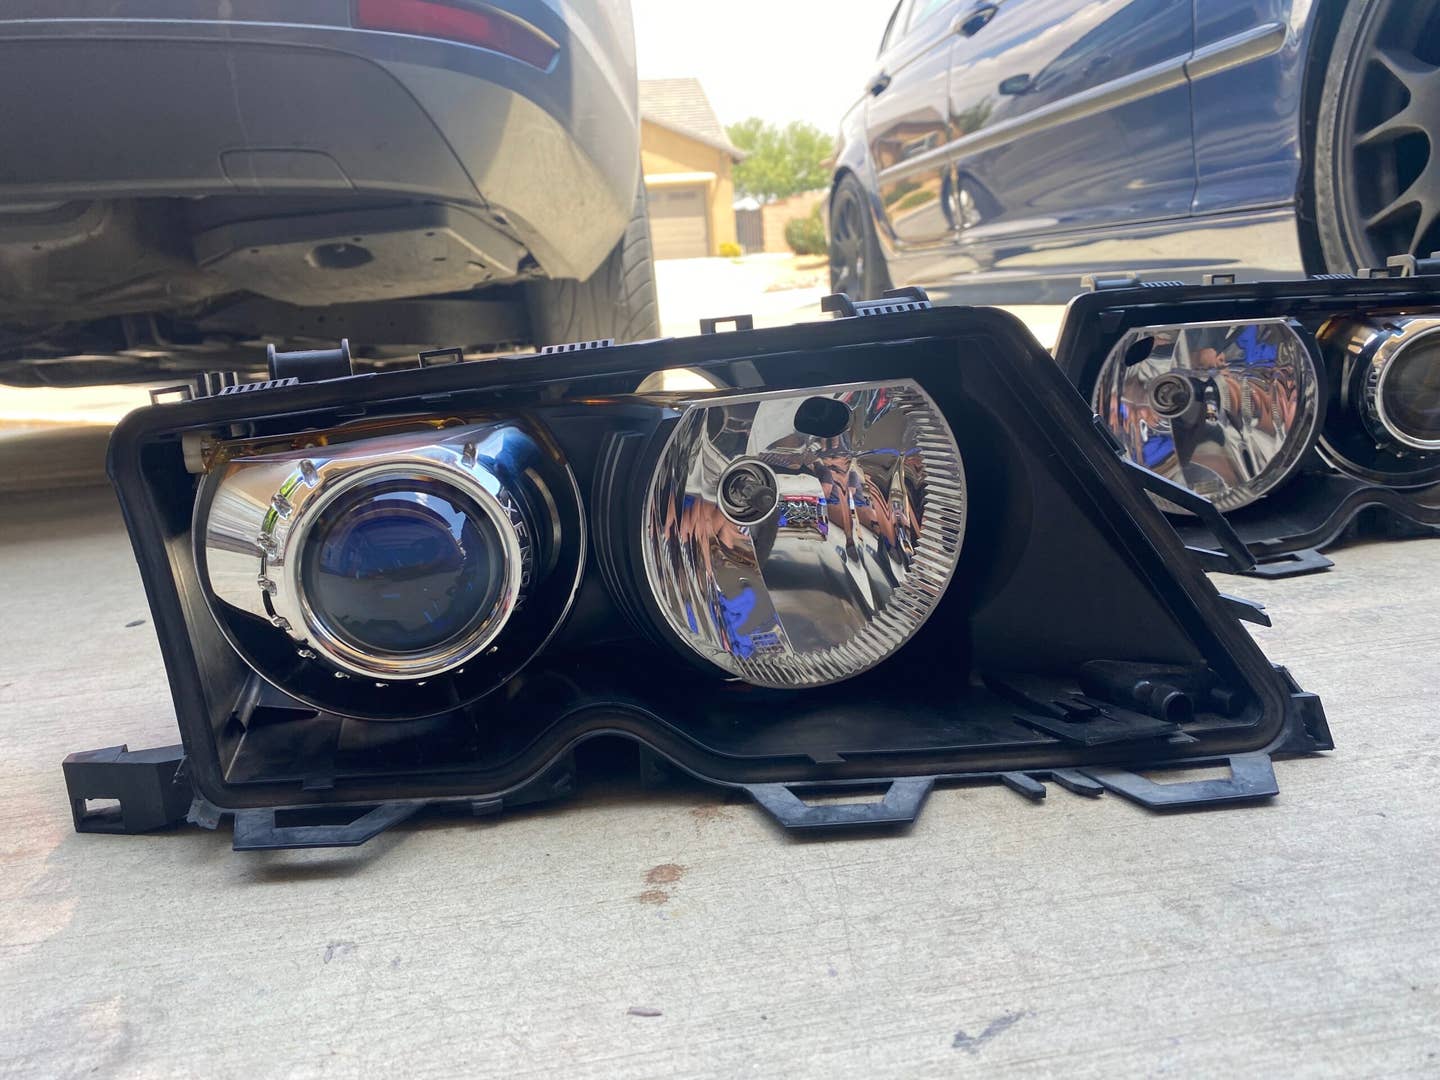 A 2004 BMW 330i headlight housing sans lens with new projector retrofit. A blue BMW 330i is off to the right. A grey VW Jetta is to the left.